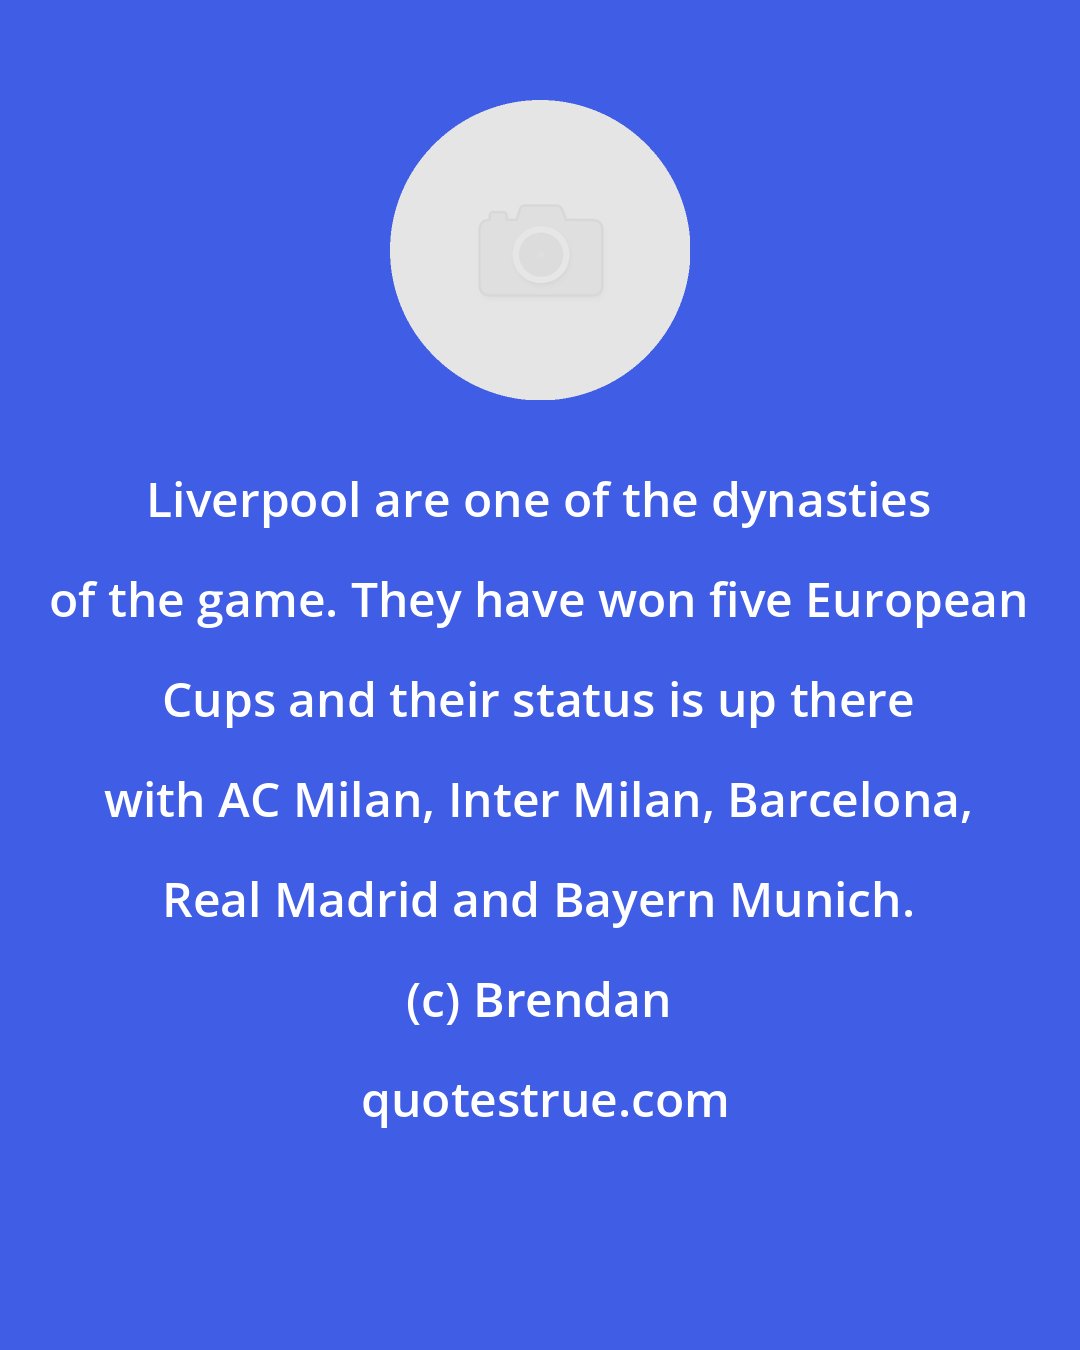 Brendan: Liverpool are one of the dynasties of the game. They have won five European Cups and their status is up there with AC Milan, Inter Milan, Barcelona, Real Madrid and Bayern Munich.